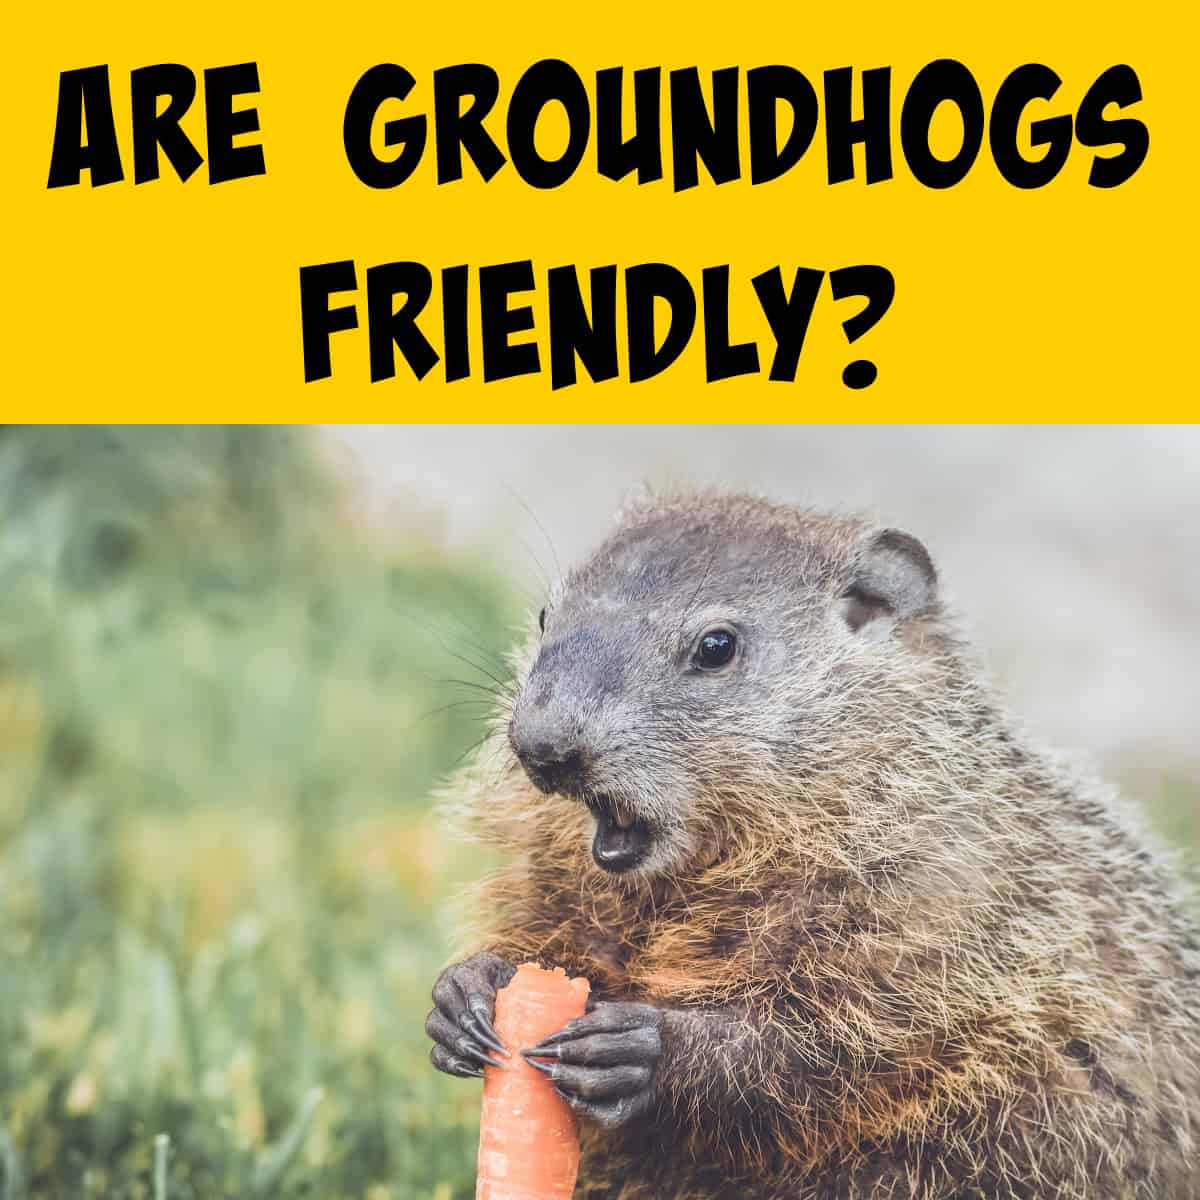 Friendly groundhog eating a carrot